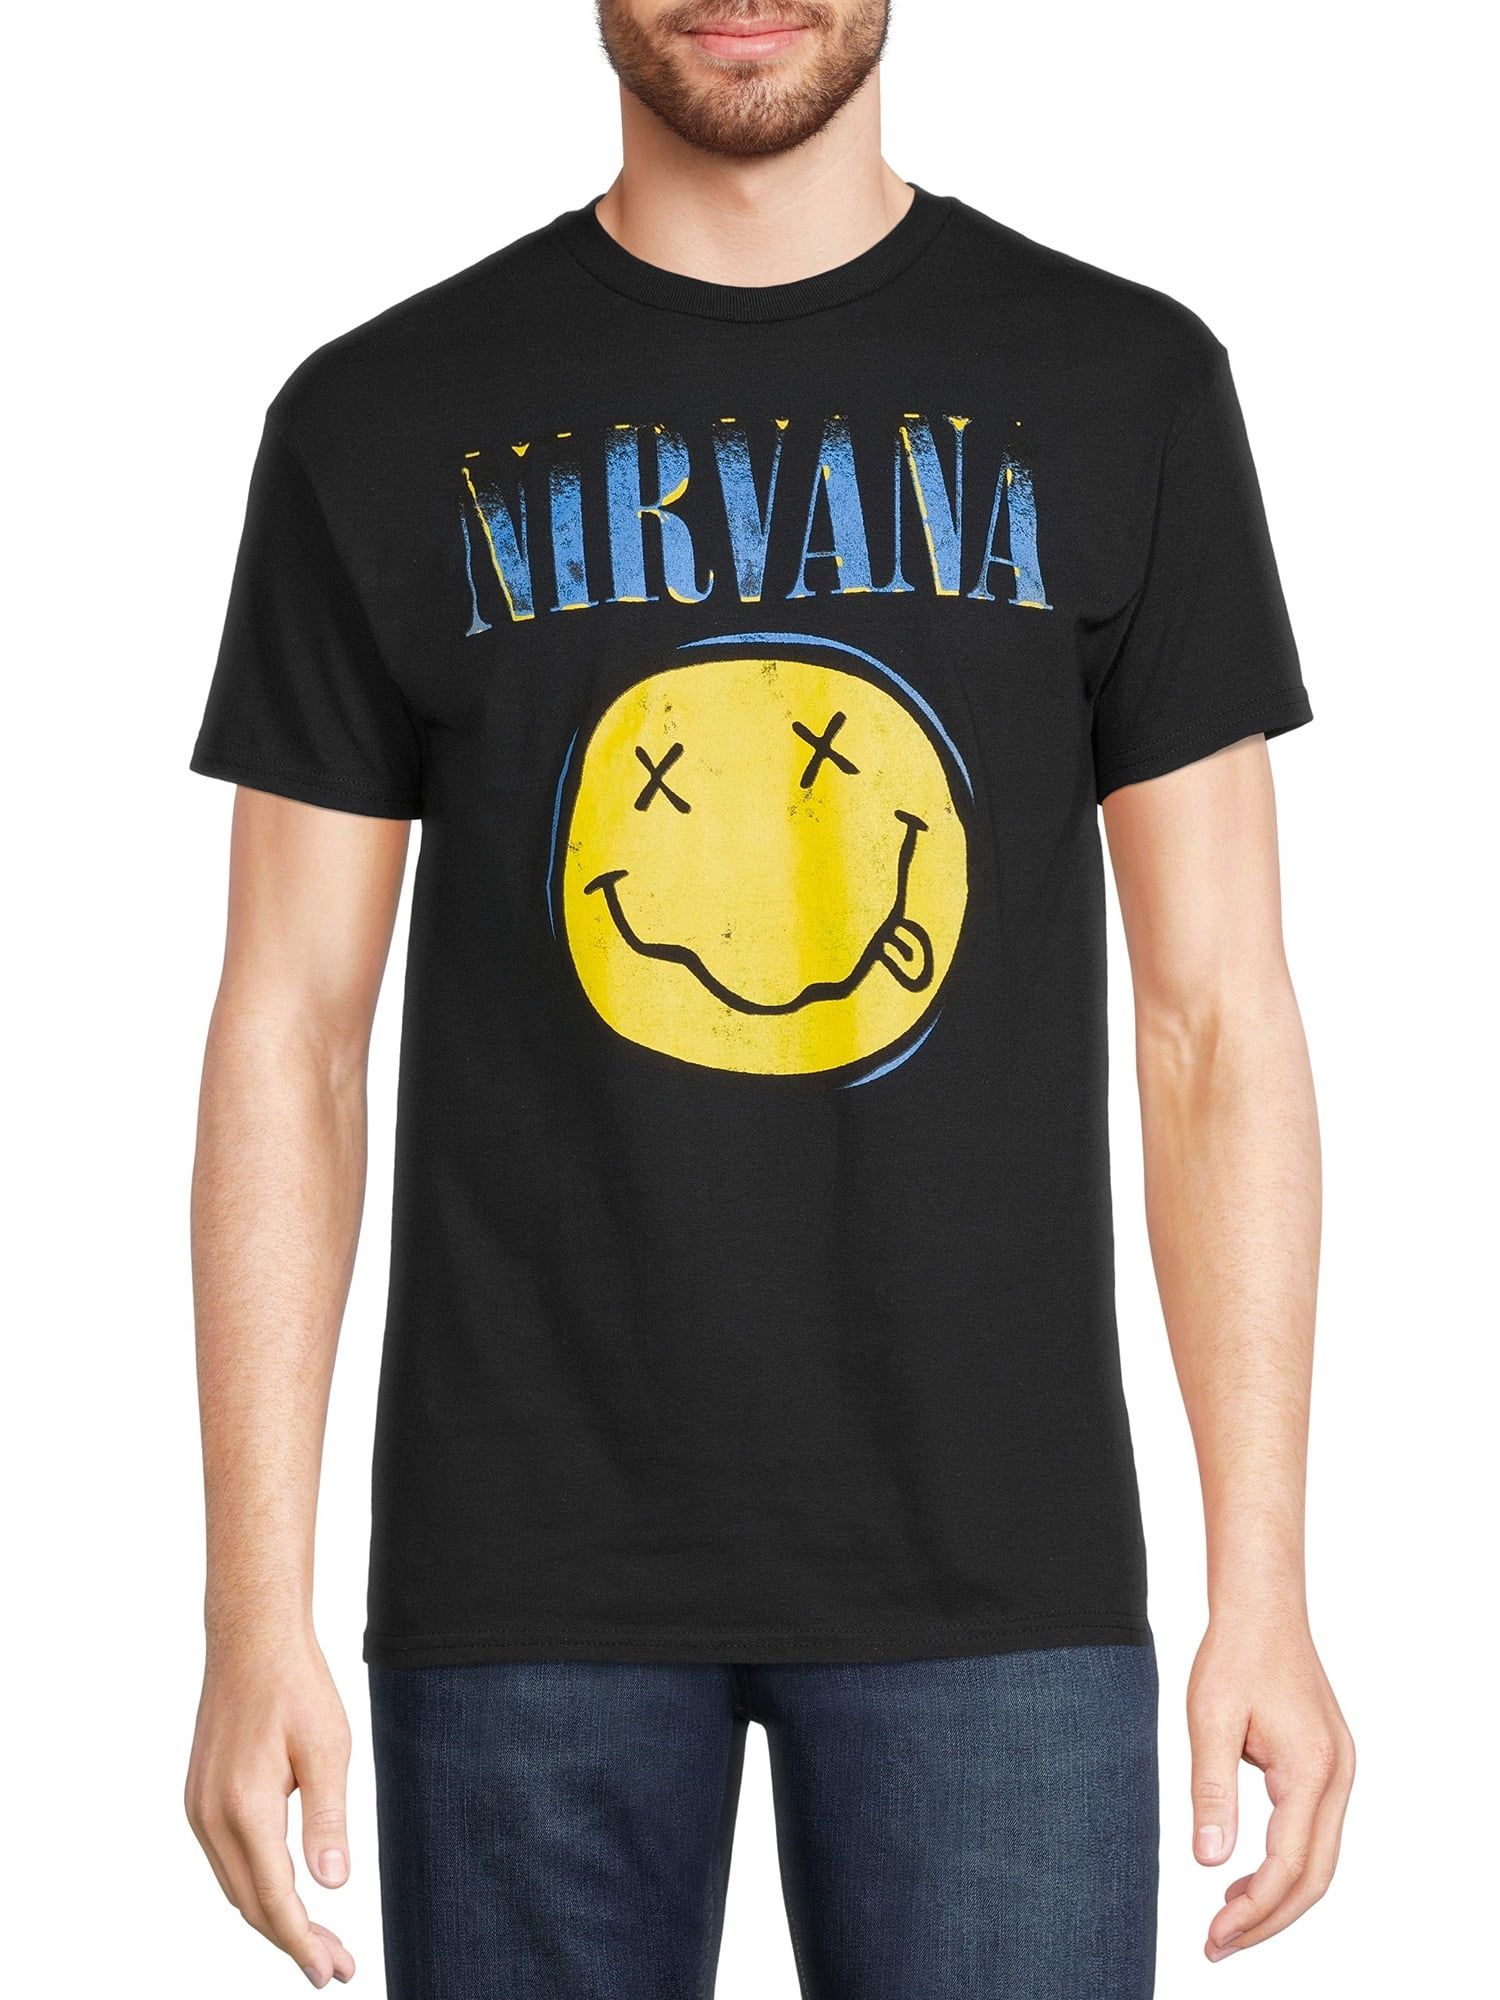 Nirvana Short Sleeve Graphic Crew Neck Relaxed Fit T-Shirt (Men's or Men's Big & Tall), 1 Pack | Walmart (US)